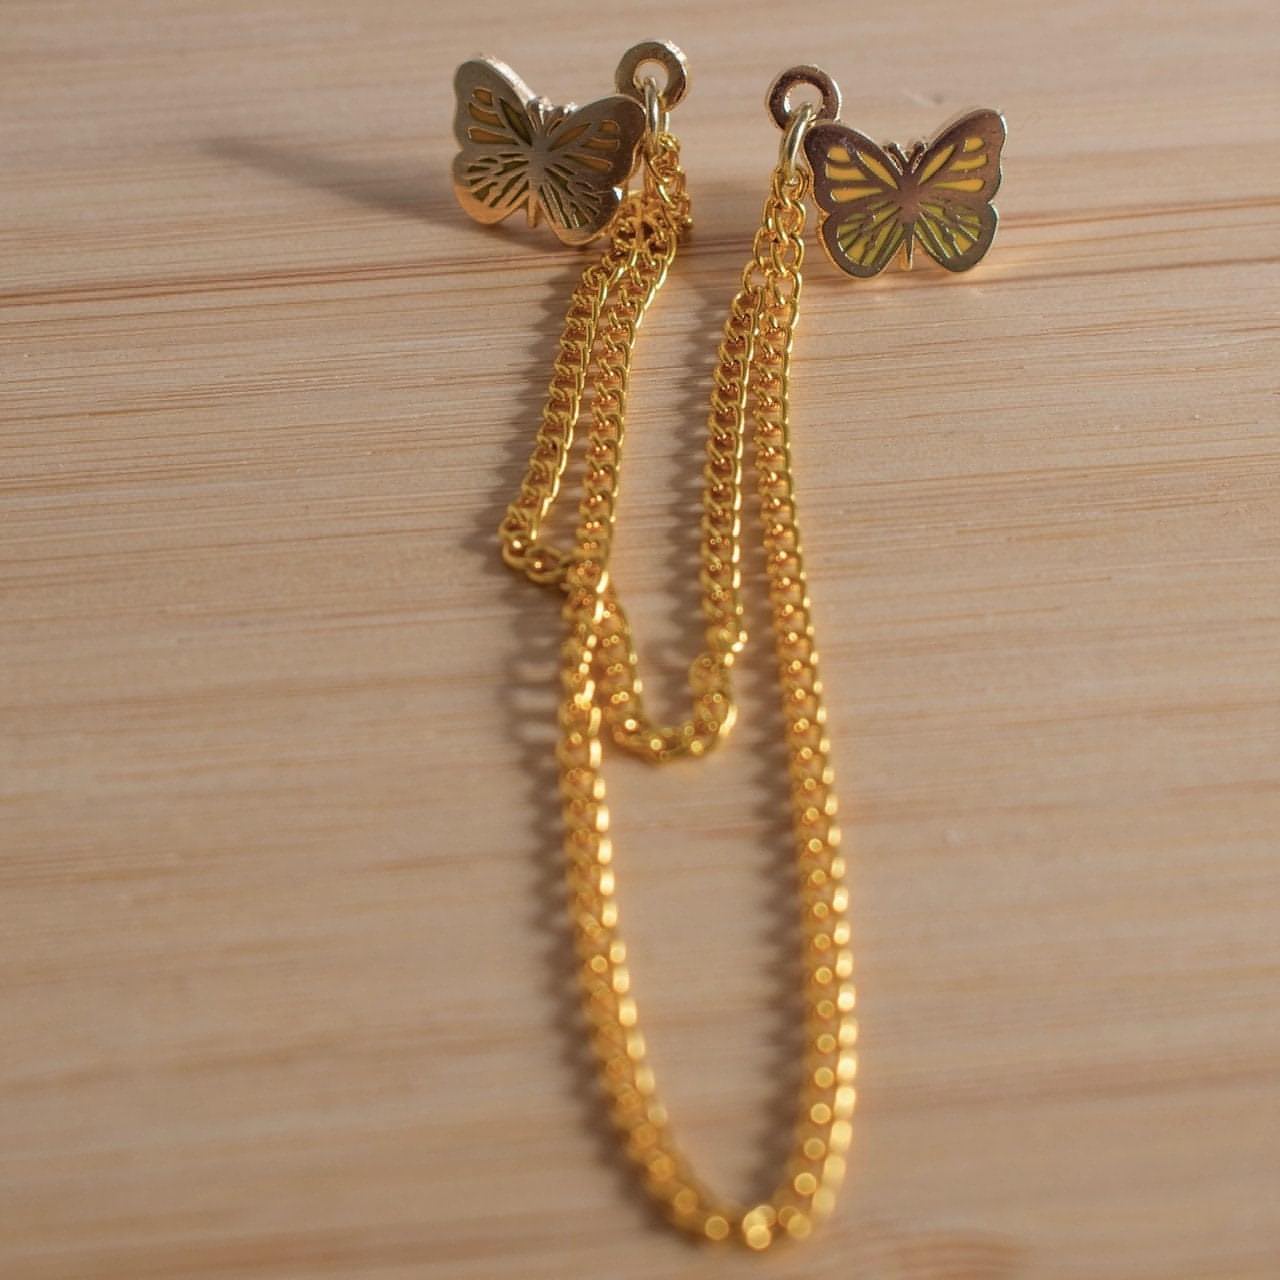 A wider shot of the butterfly pins show the length of the chains.